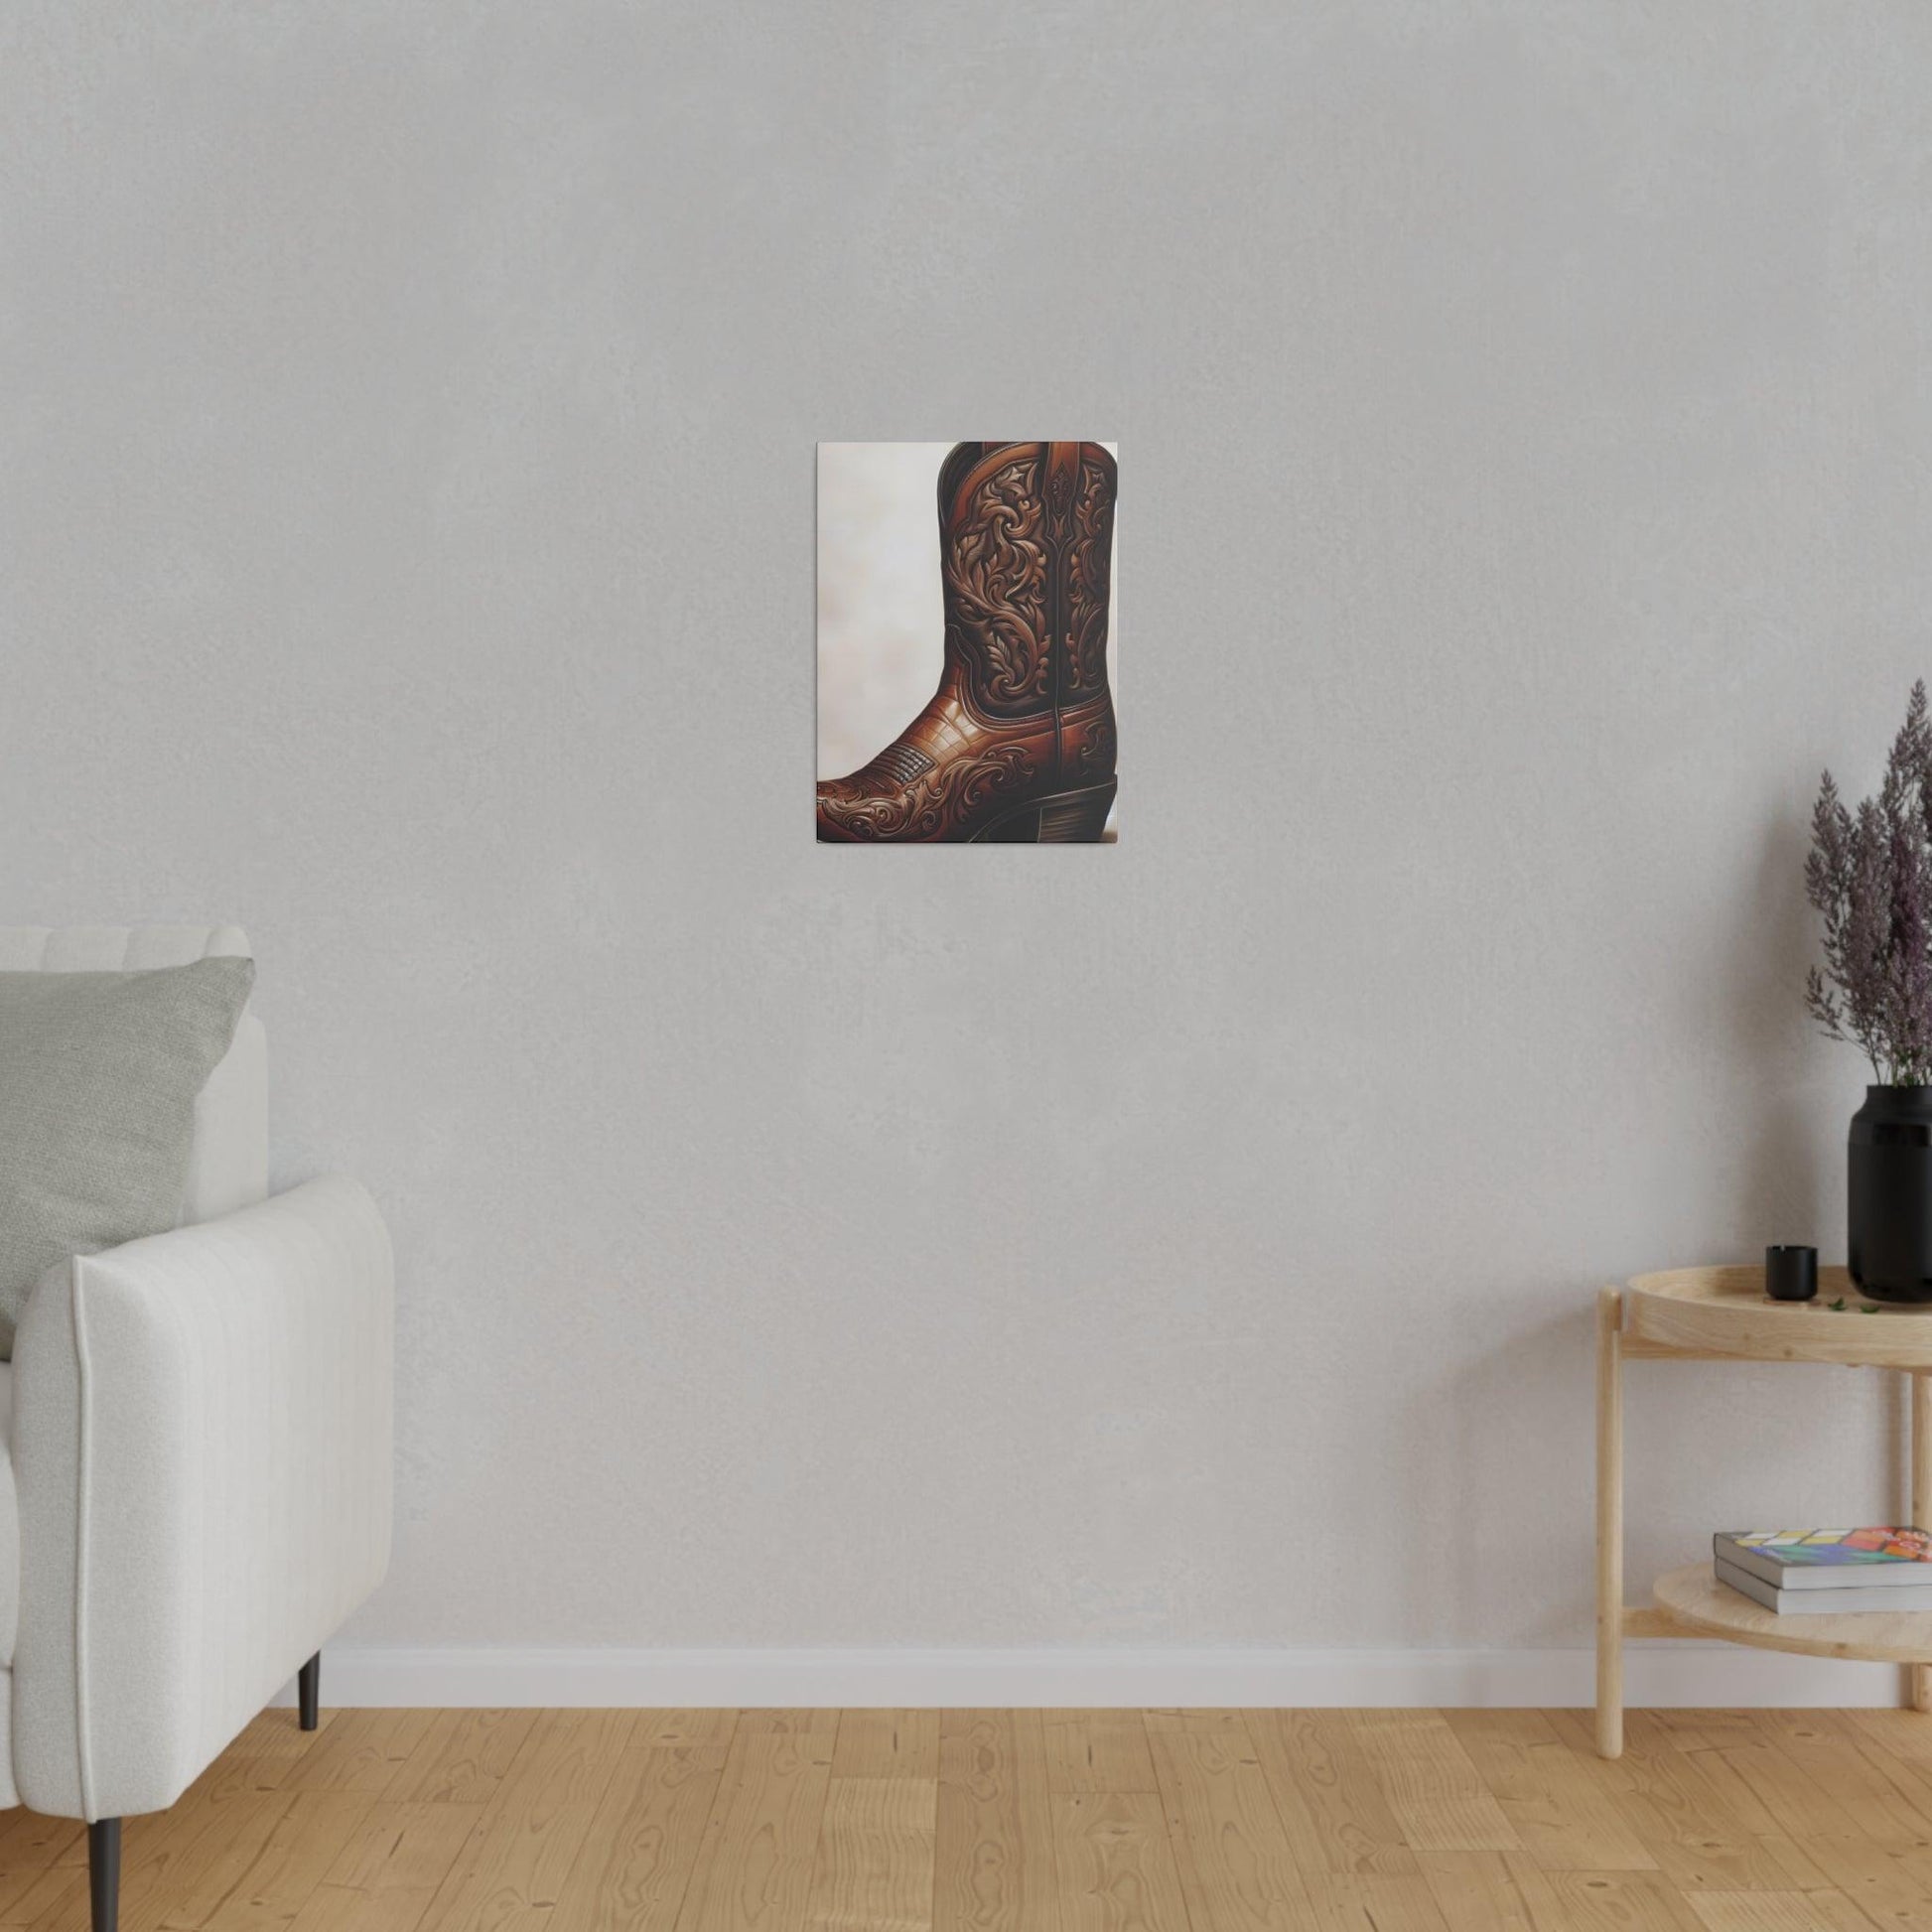 "Rustic Rodeo: Vintage Cowboy Boots Canvas Wall Art" - The Alice Gallery